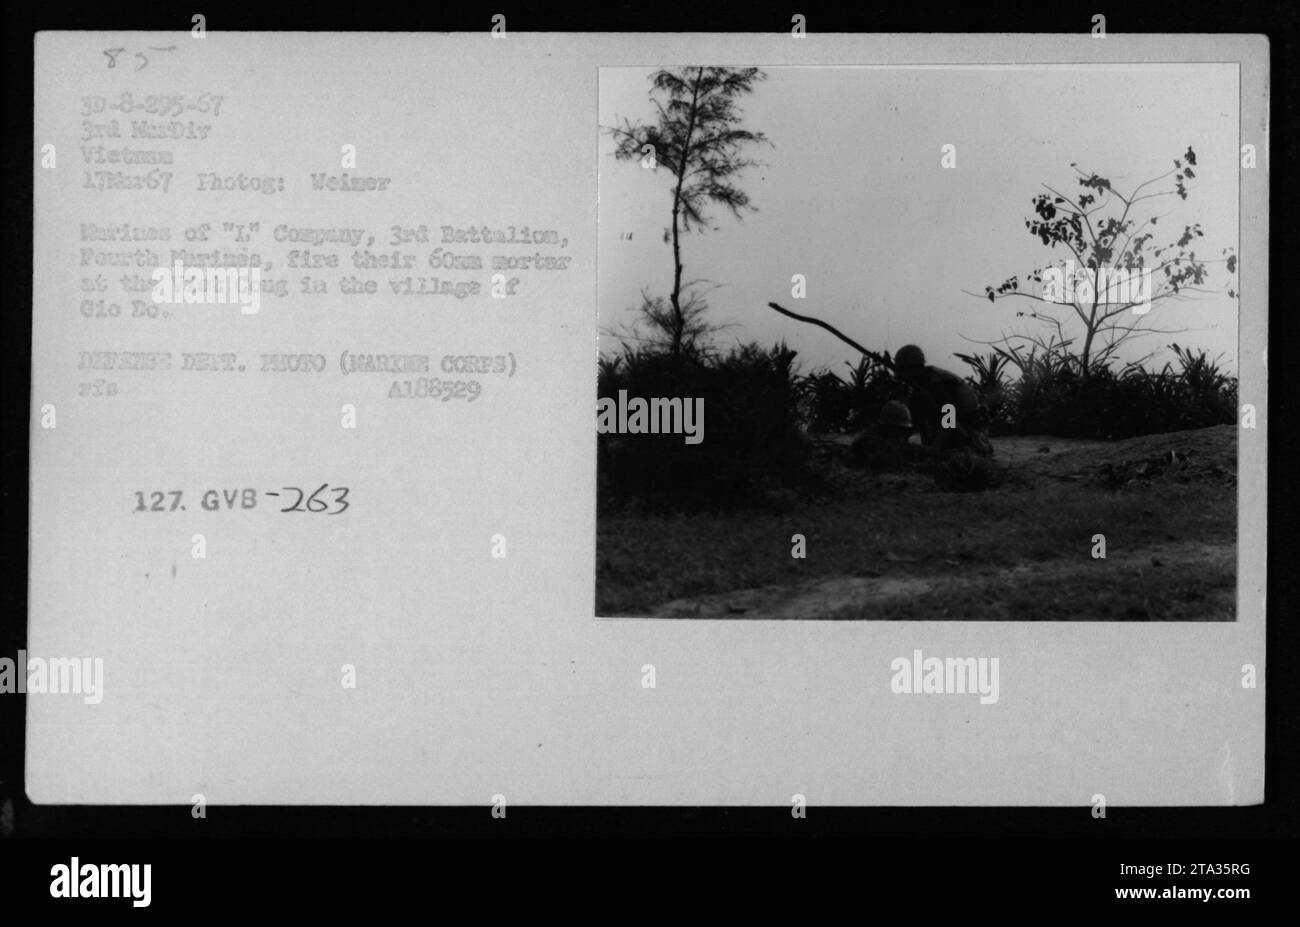 Soldiers from 'I' Company, 3rd Battalion, Fourth Marines, are seen firing their 60mm mortar at the Viet Cong in the village of Gio Do on March 17, 1967. The photograph captures the military activities of the American forces during the Vietnam War. Stock Photo